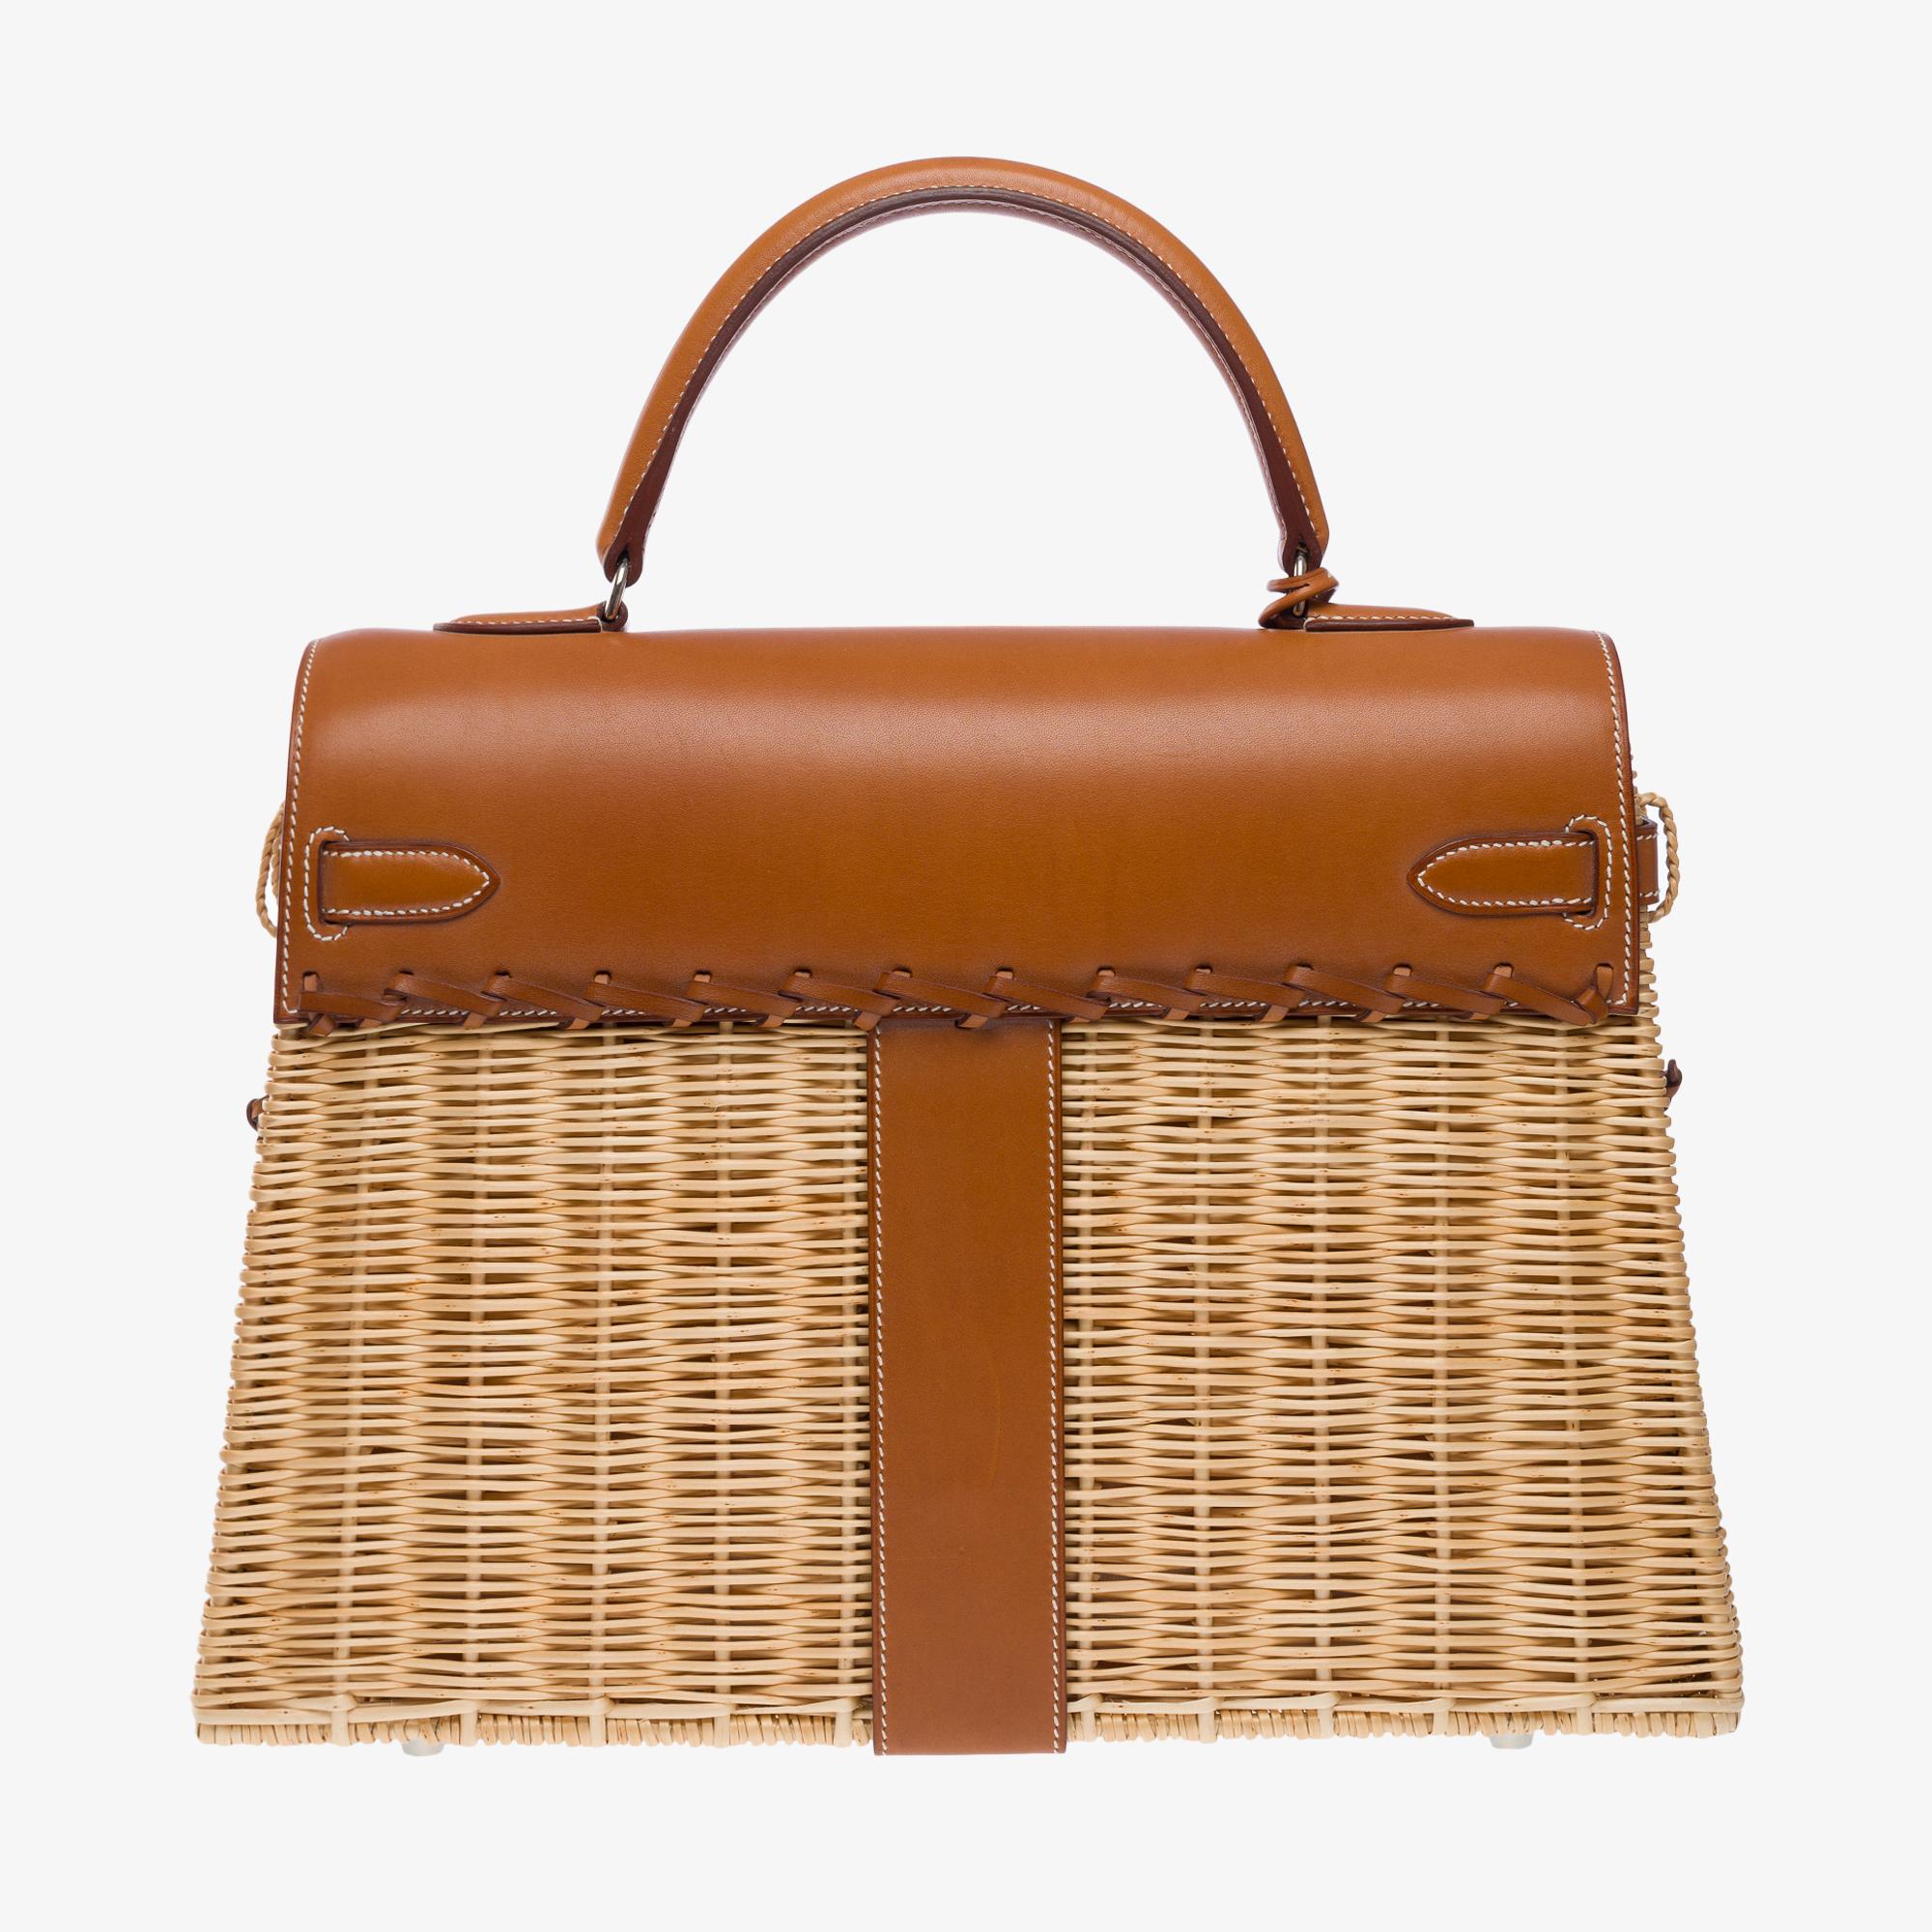 Women's or Men's Rare Hermes Kelly 35 Picnic in wicker and barenia leather , SHW For Sale